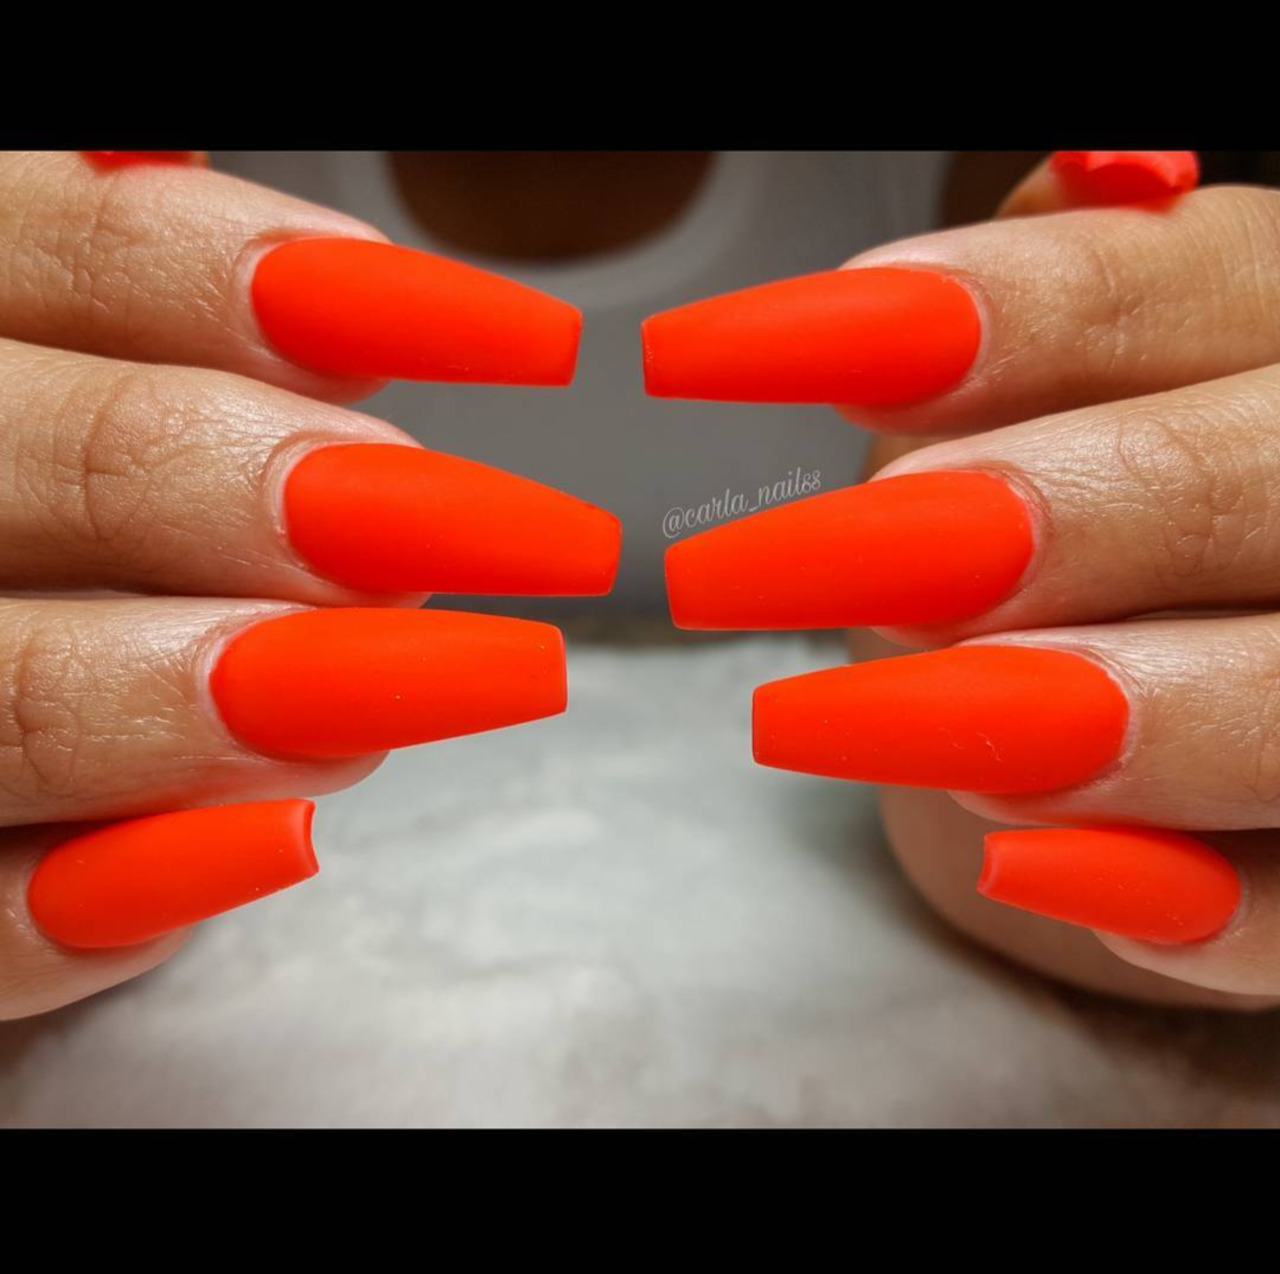 35 Cute Orange Nail Ideas To Rock in Summer : Peach, Orange and Coral Matte  Nails